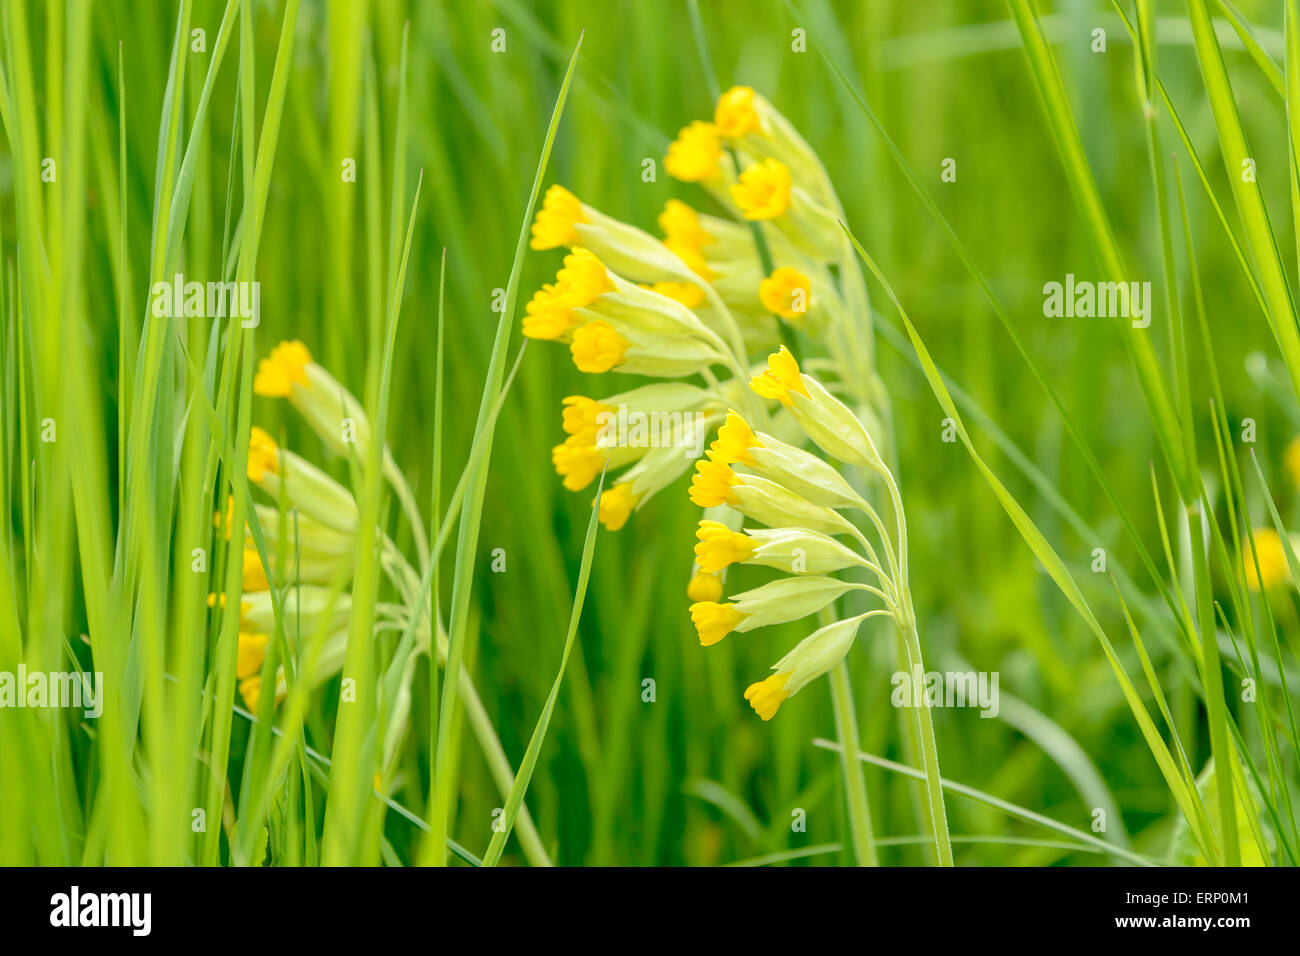 Cowslip (Primula veris). Here seen close up surrounded by green grass on meadow. Shallow depth of field, focus on front flower, Stock Photo